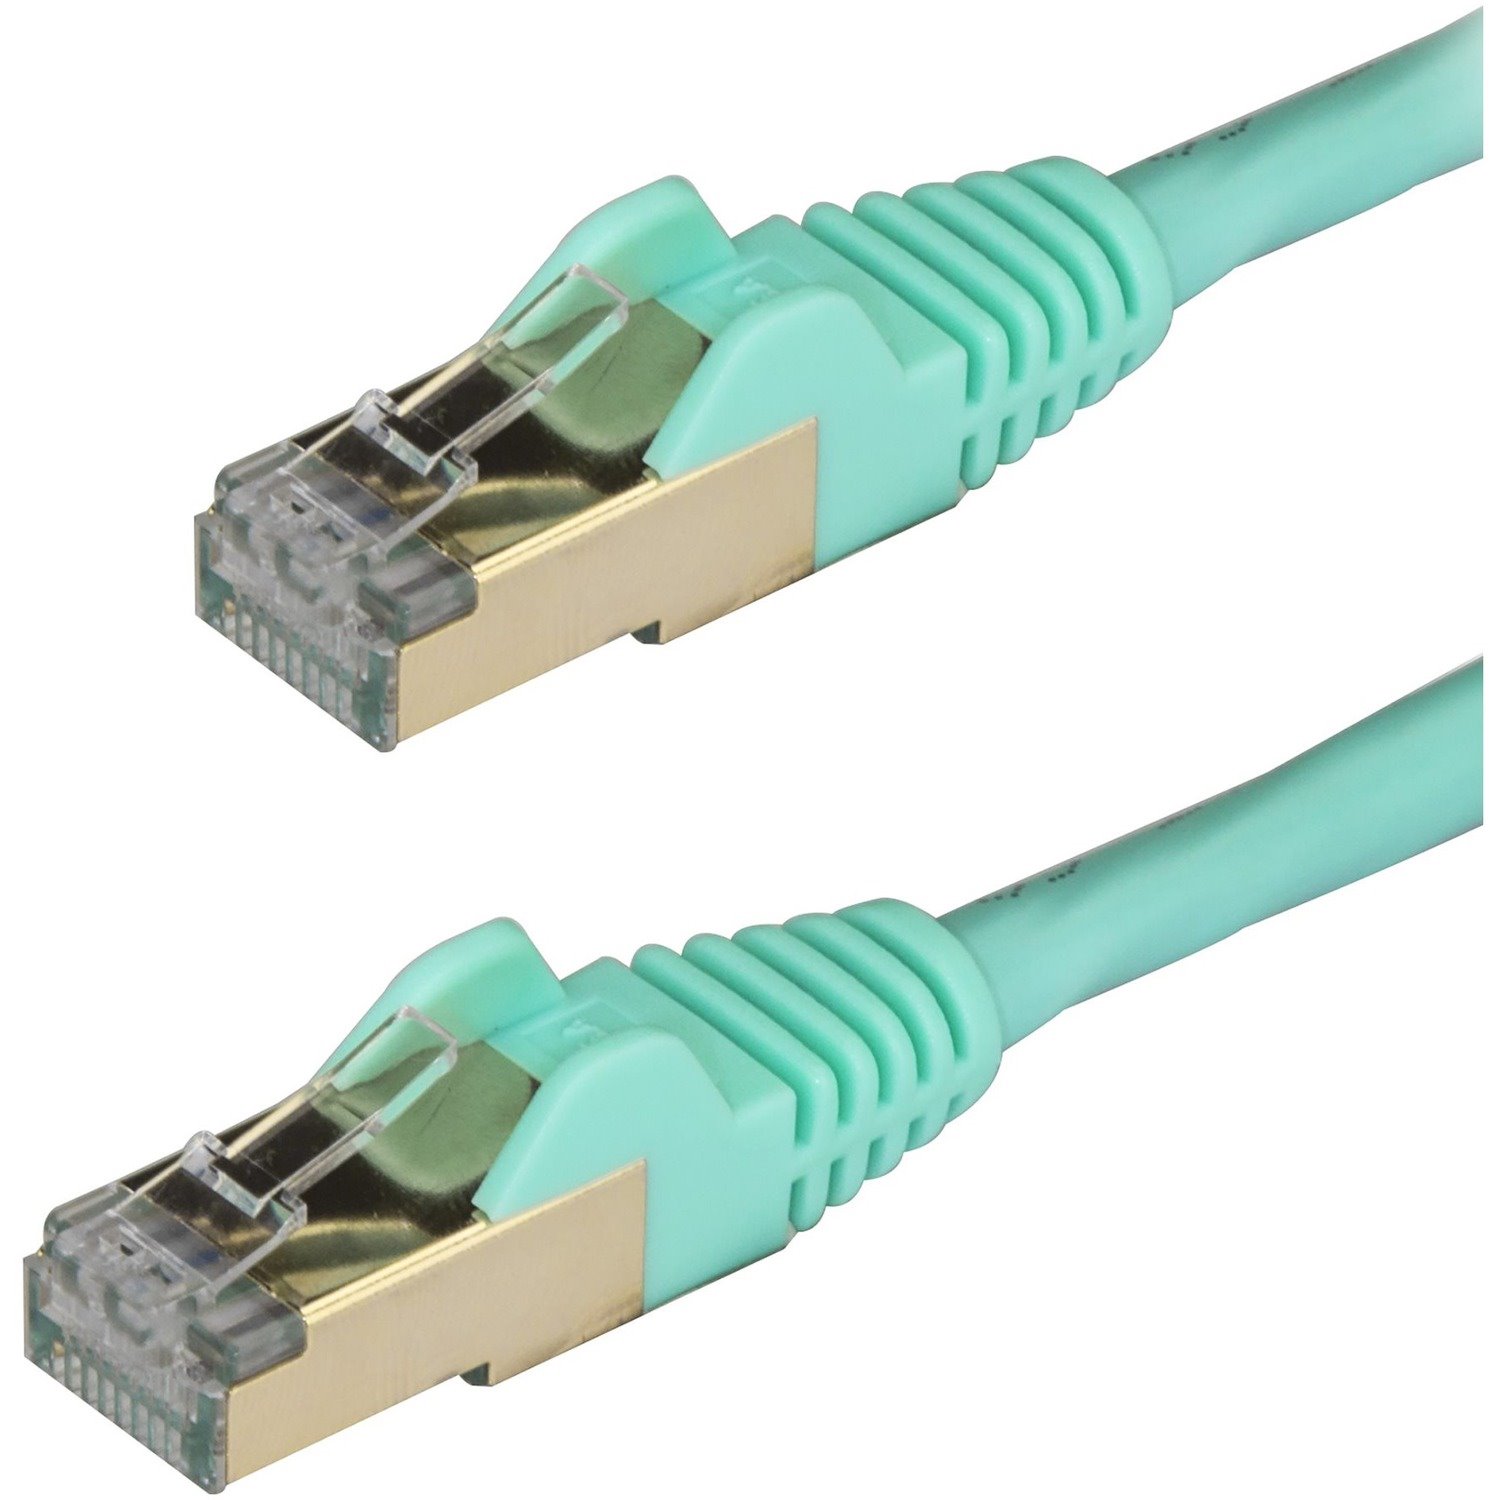 StarTech.com 3 m Category 6a Network Cable for PoE-enabled Device, Computer, Hub, Router, Patch Panel - 1